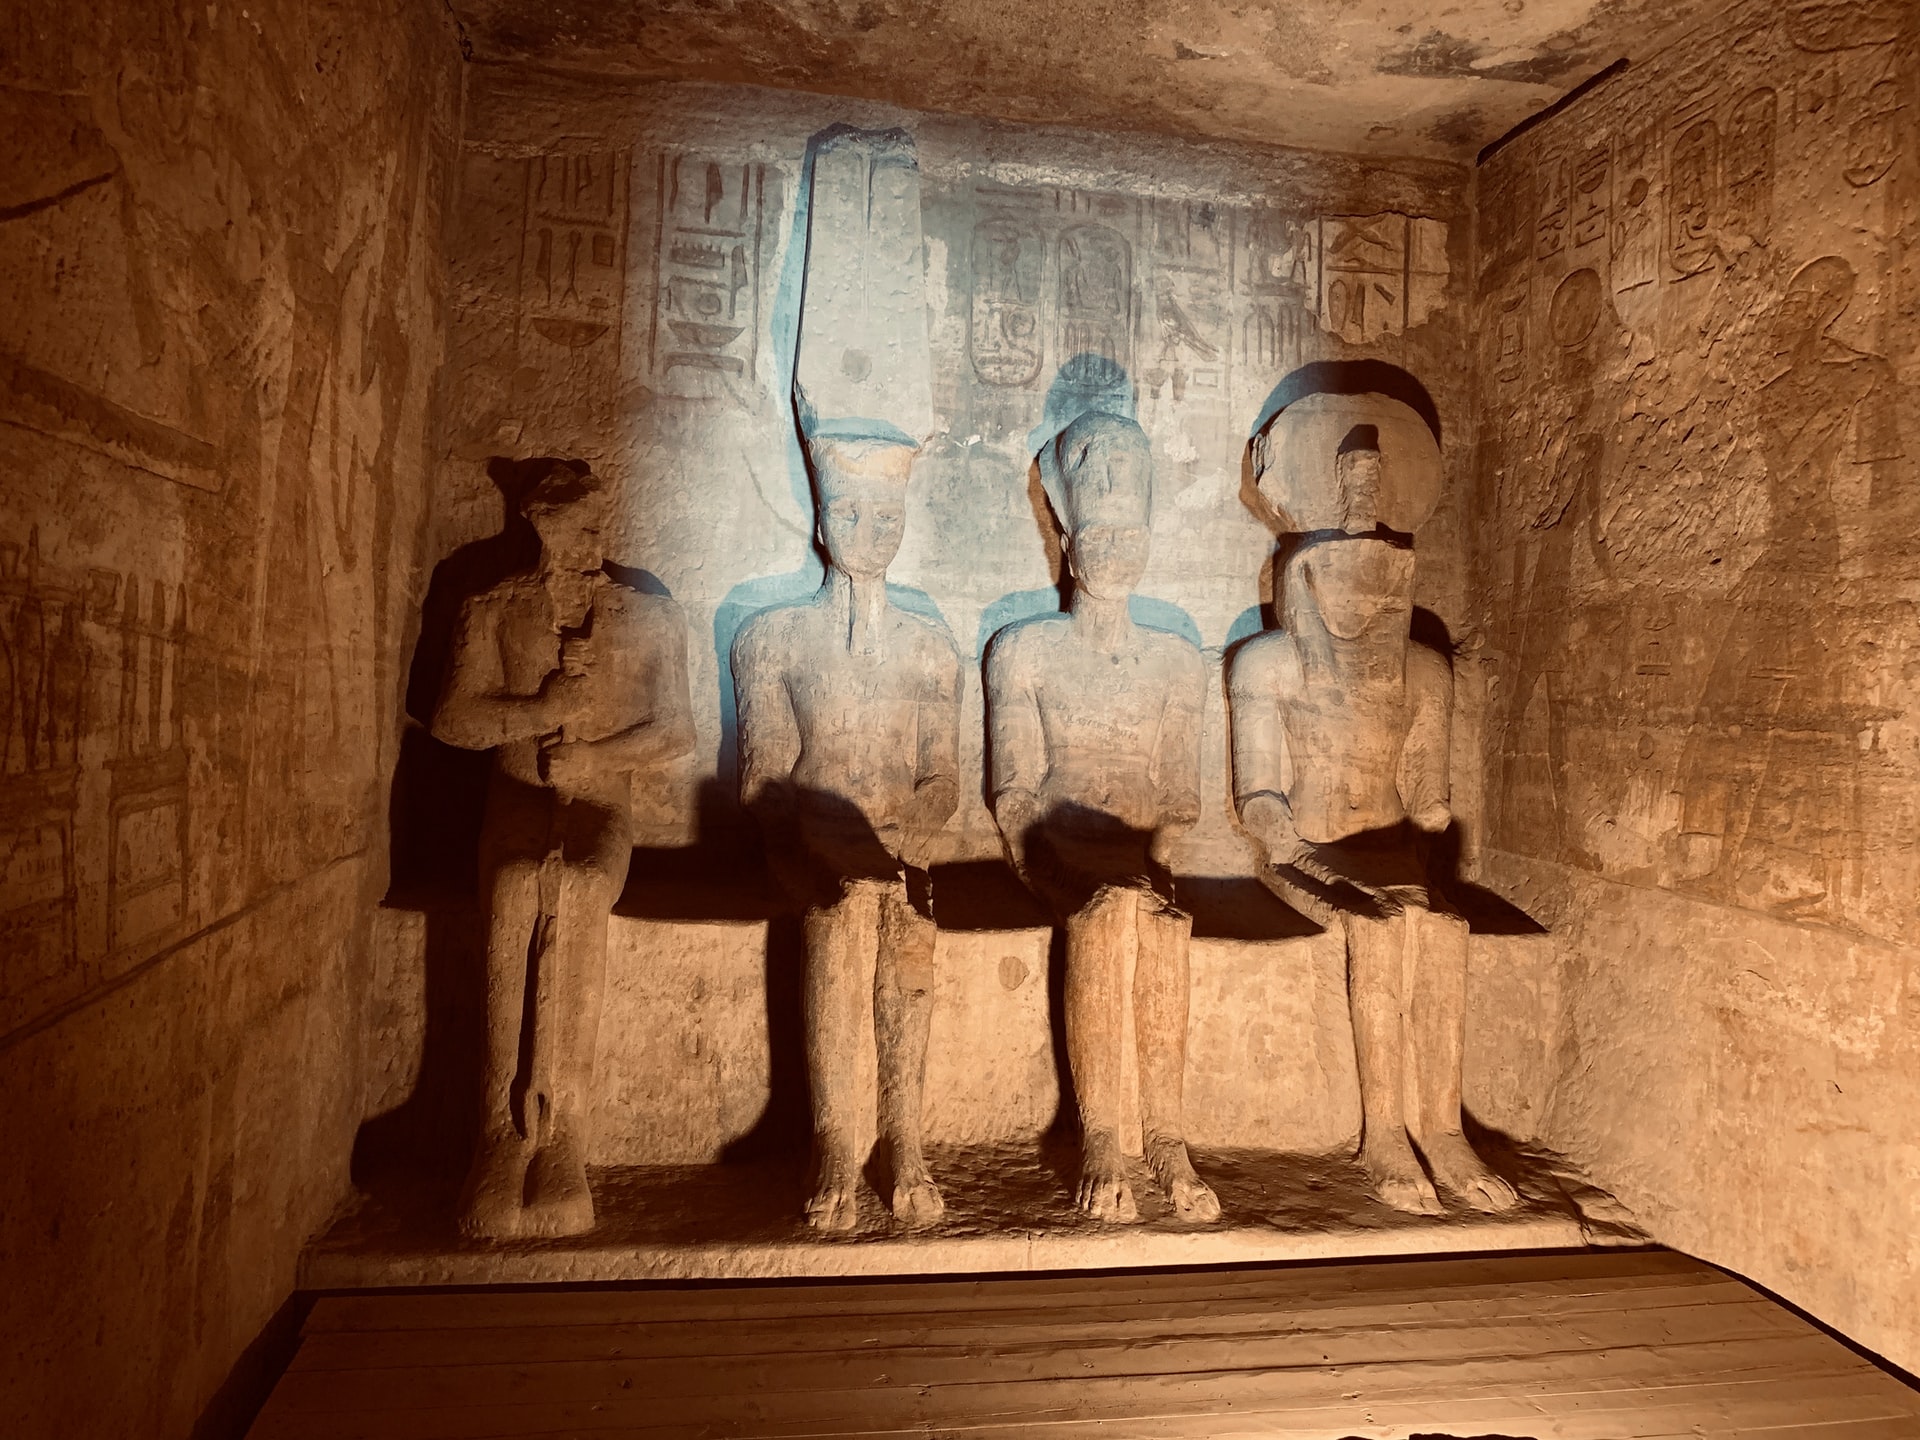 Statues in a temple in Egypt